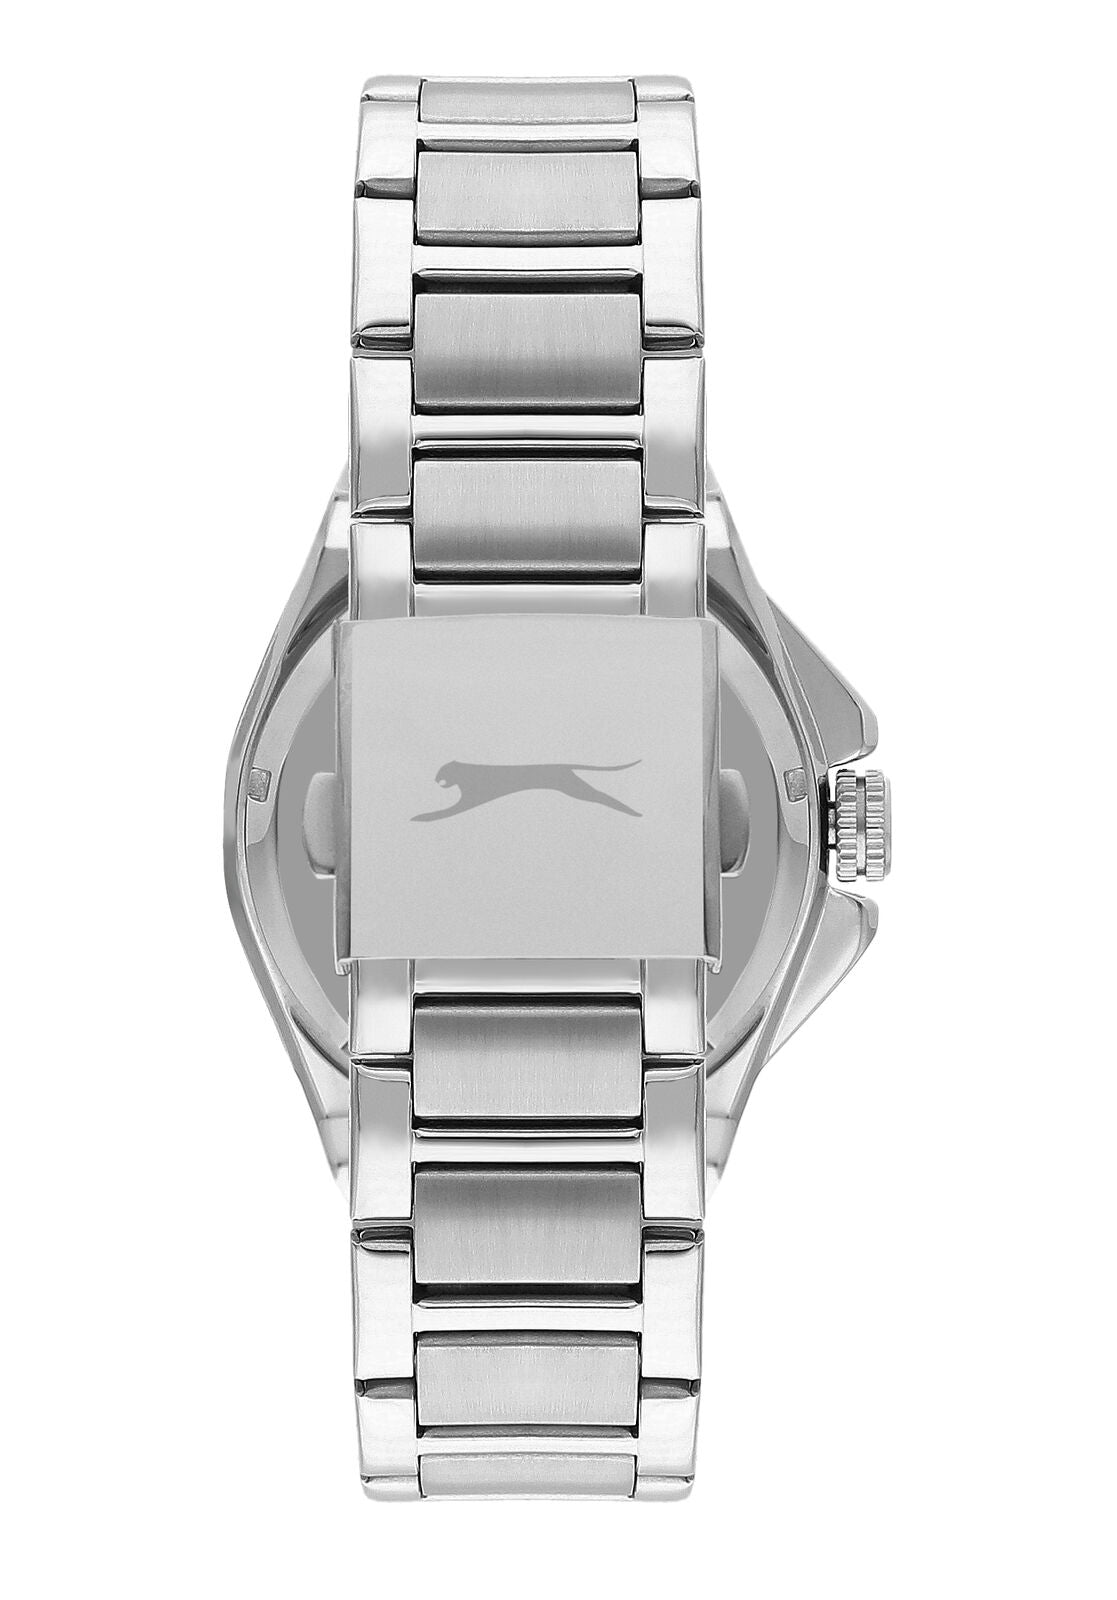 Slazenger Automatic See Through Movement Solid Stainless Steel Gents Watch Luxury Business Sports